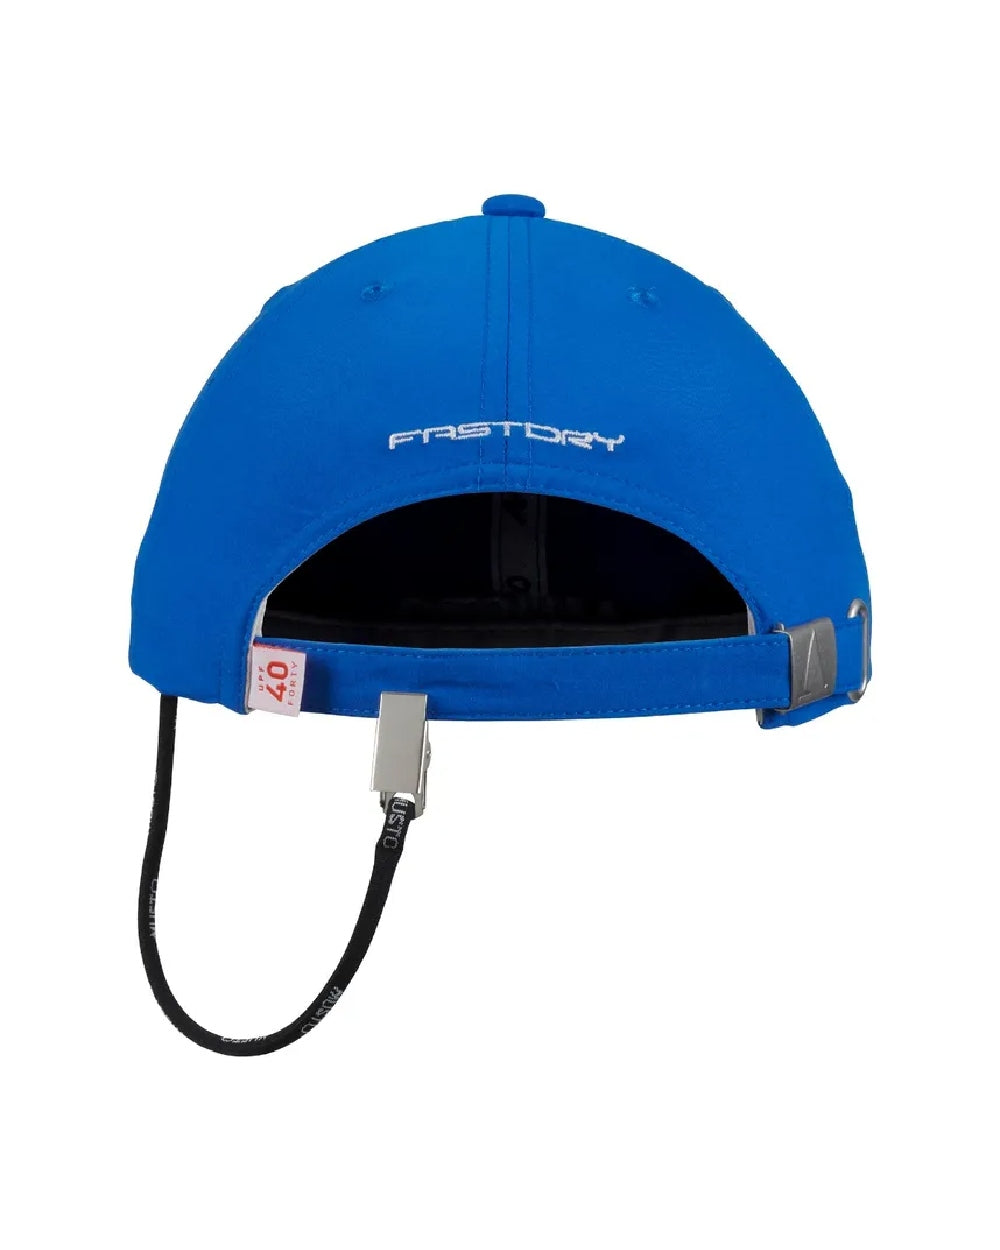 Aruba Blue Coloured Musto Childrens Essential Fast Dry Crew Cap On A White Background 